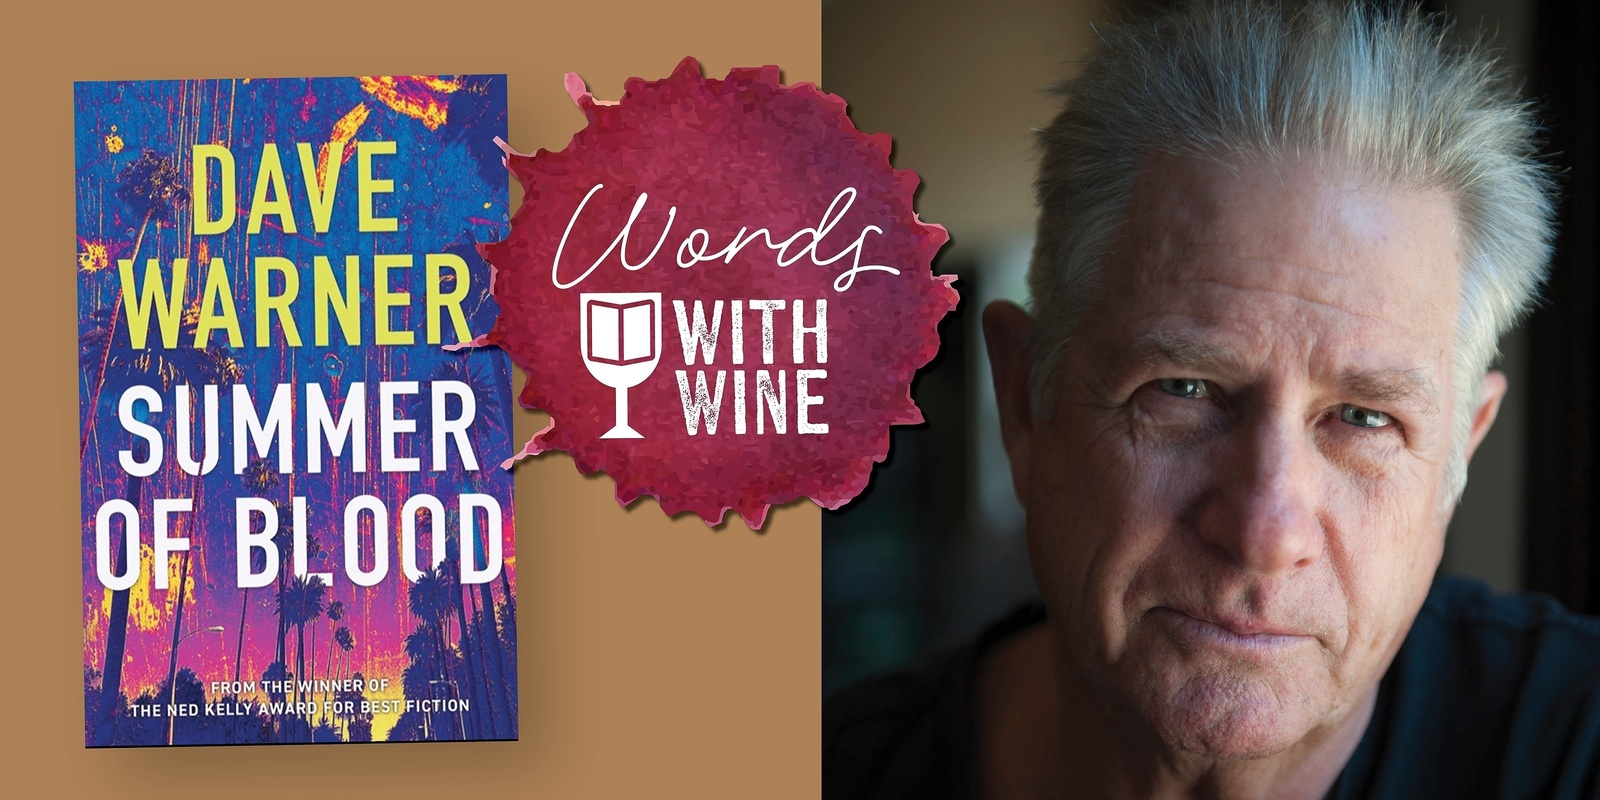 Banner image for Words with Wine: Dave Warner "Summer of Blood"